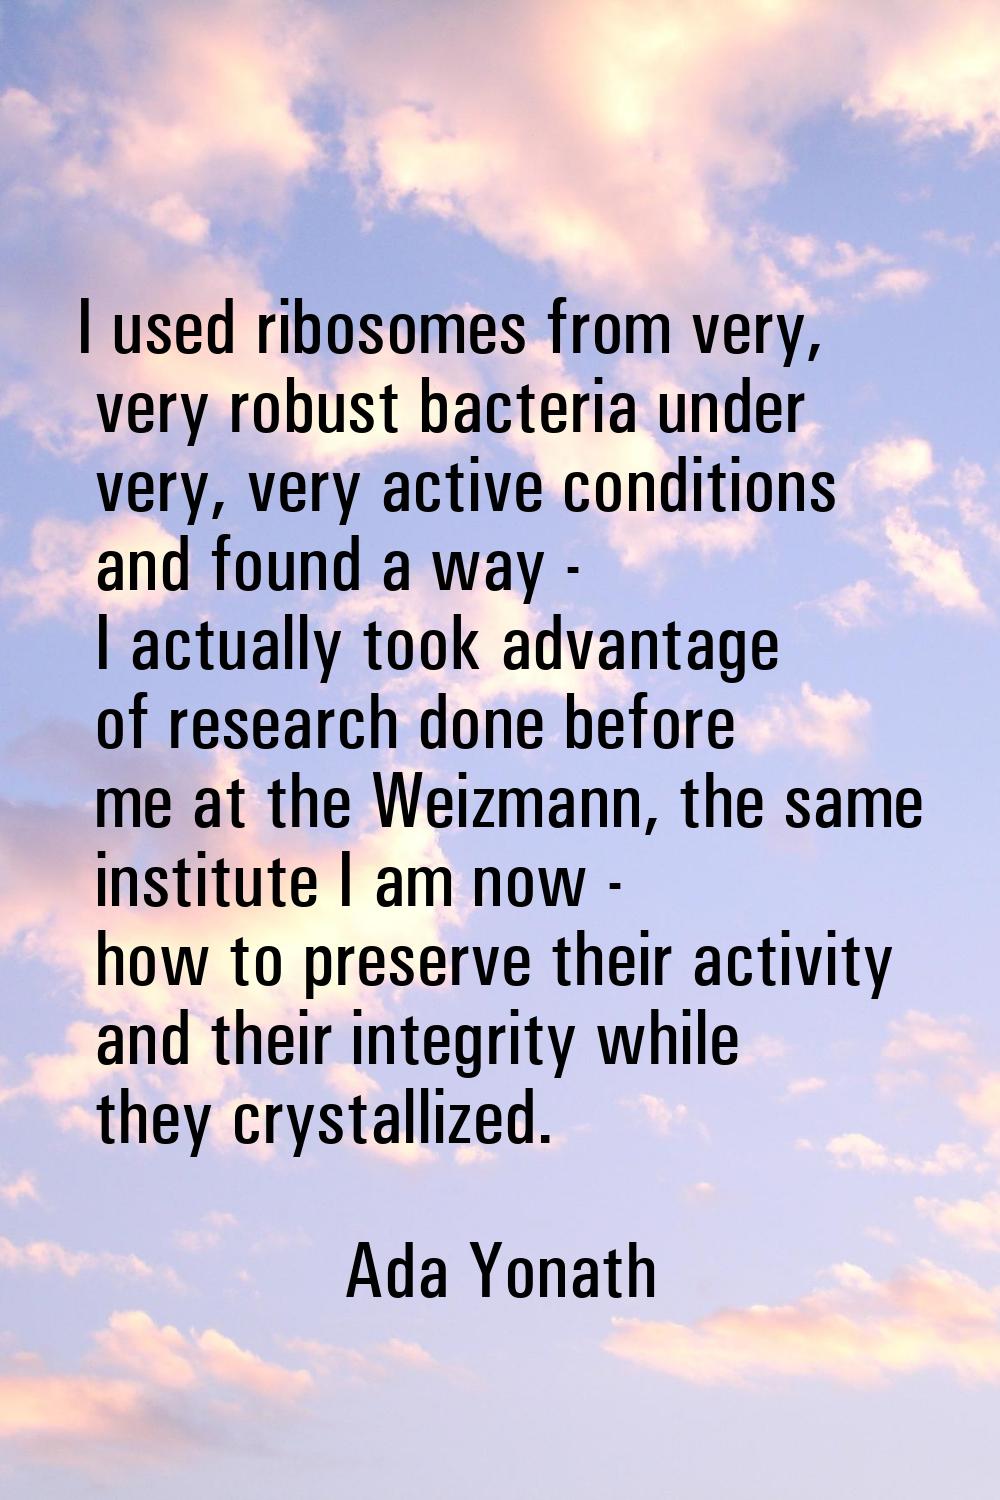 I used ribosomes from very, very robust bacteria under very, very active conditions and found a way